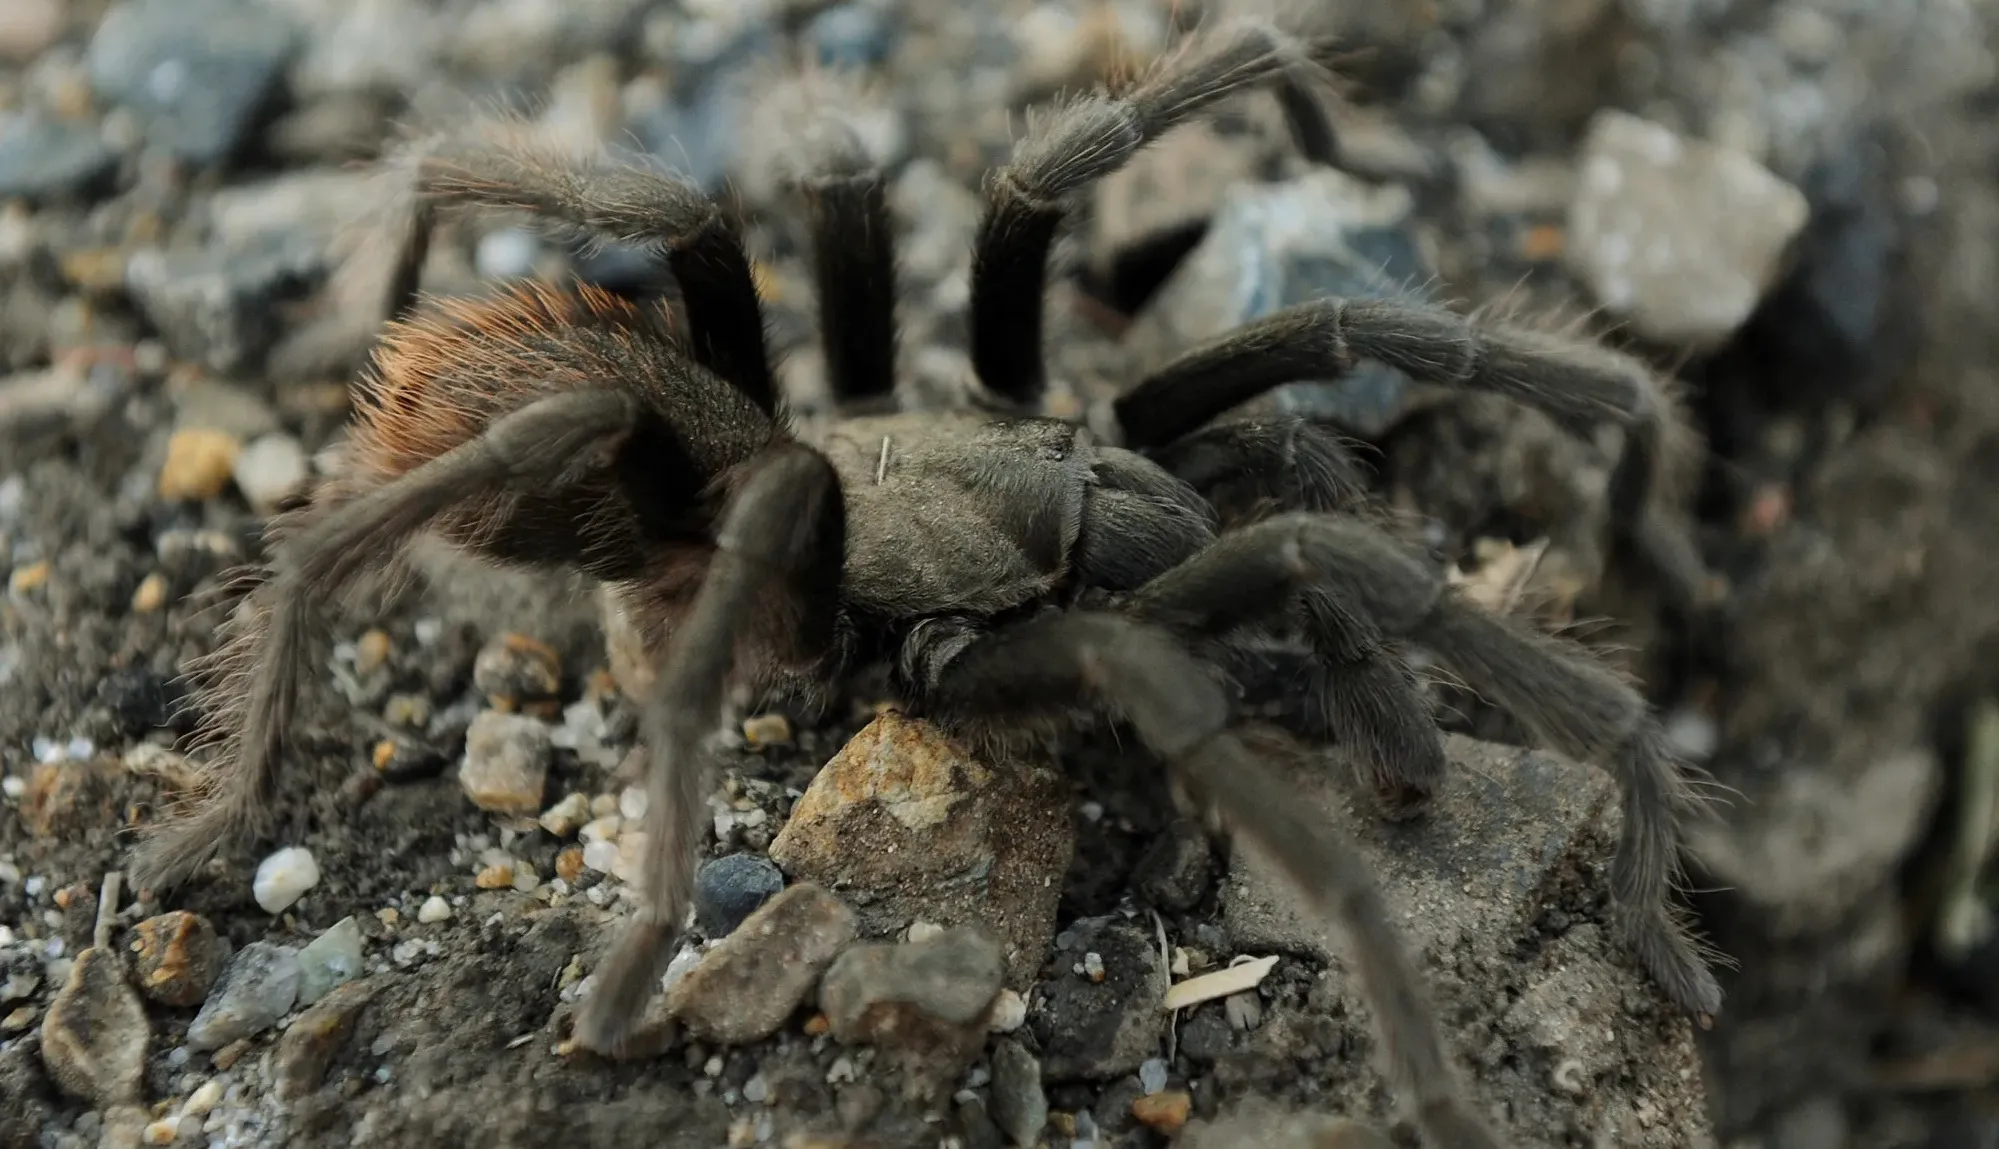 Tarantula causes traffic accident in Death Valley National Park in California